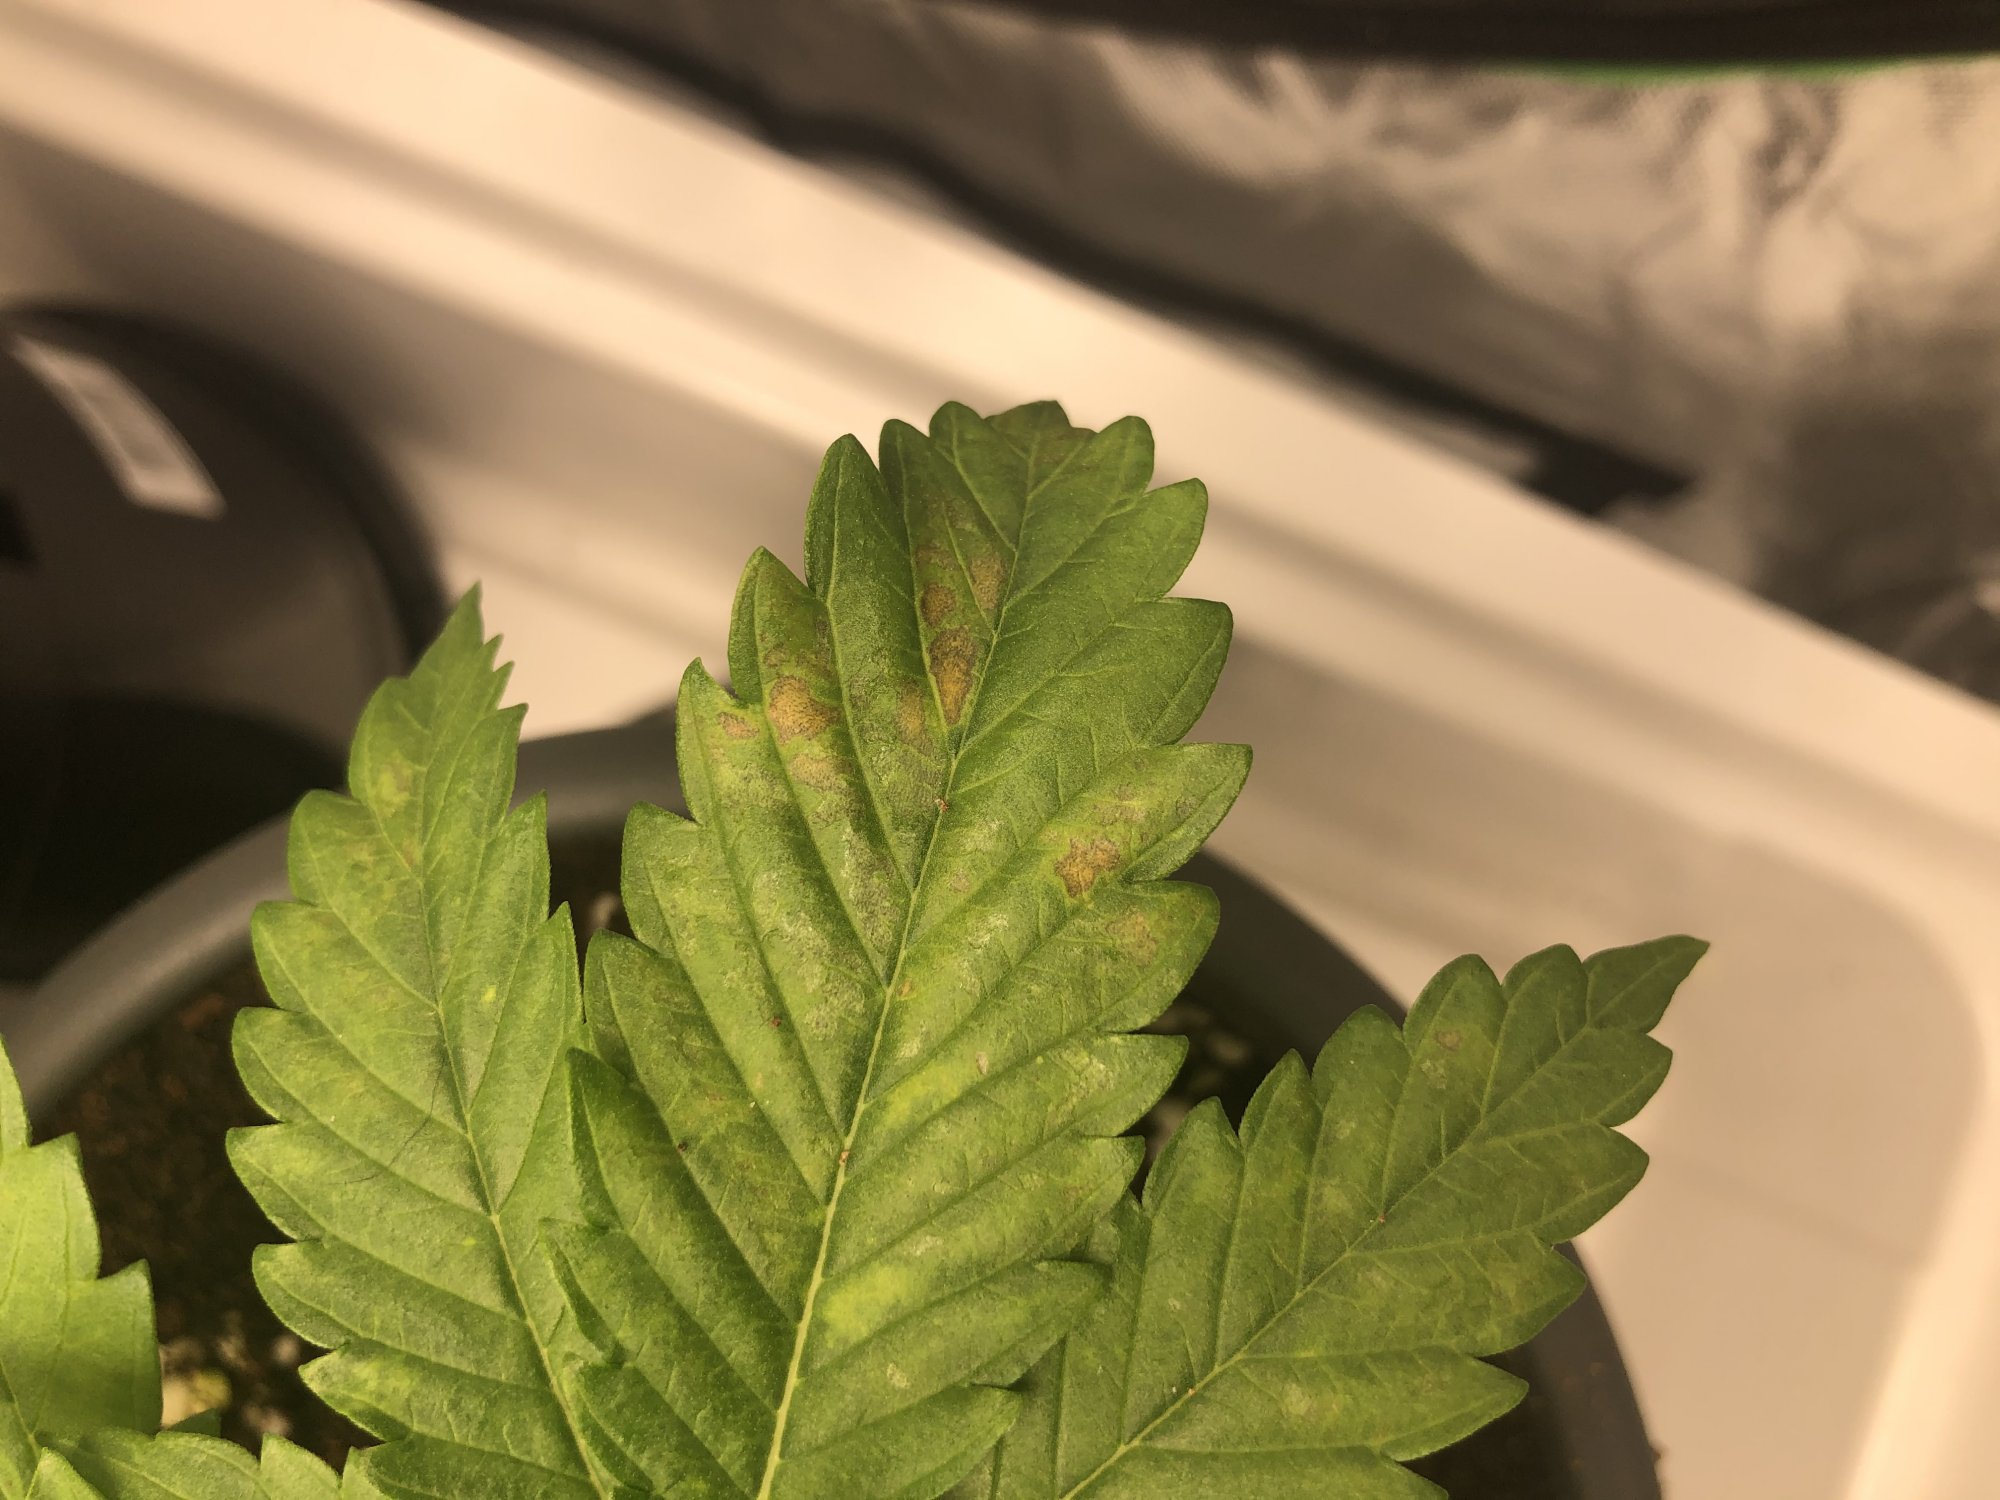 Can anyone identify the deficiency here 4